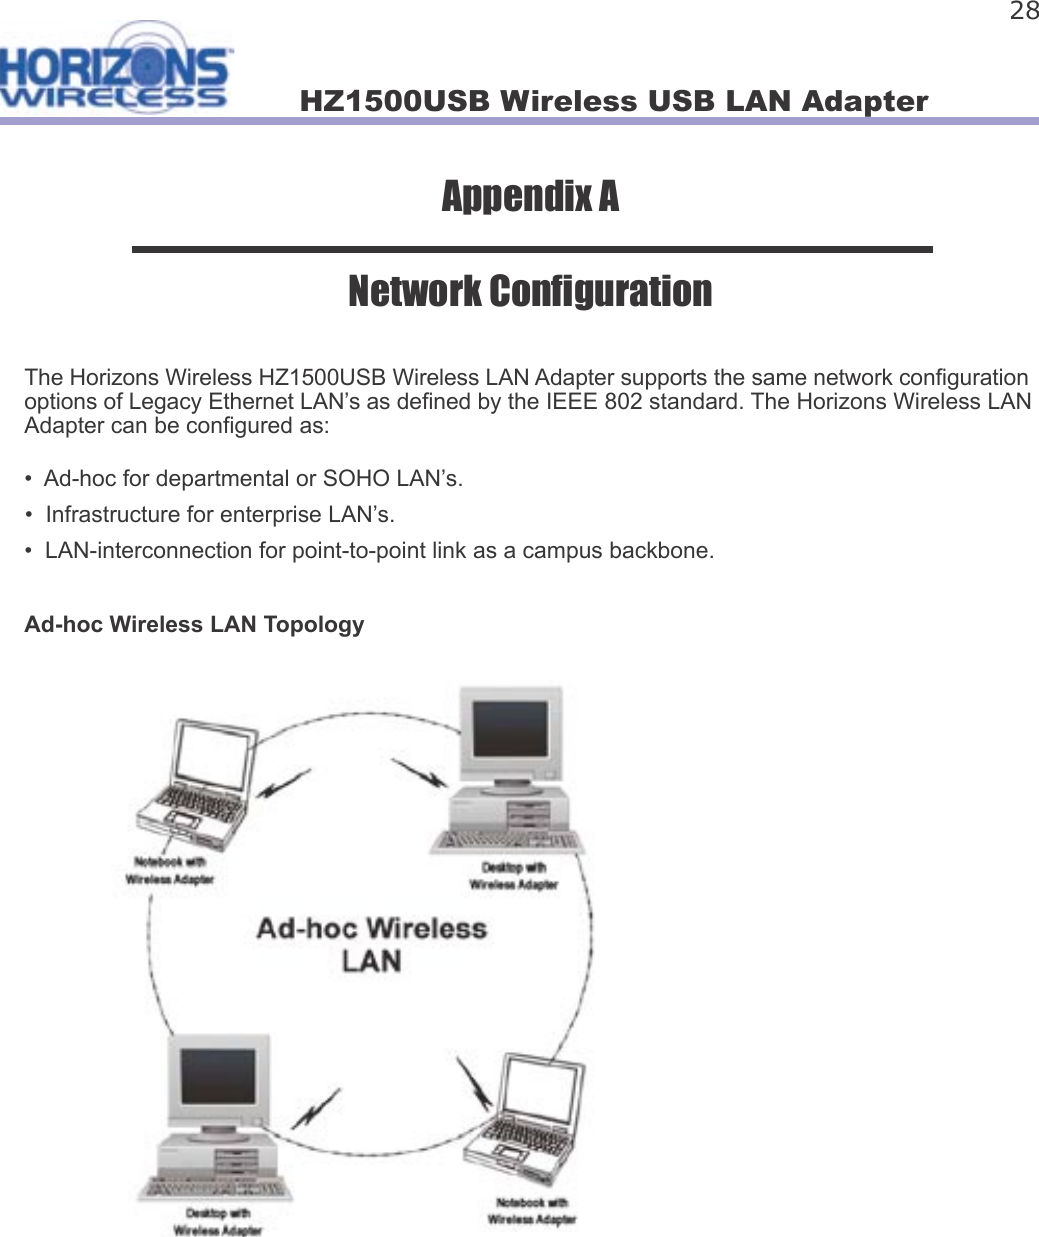 HZ1500USB Wireless USB LAN Adapter 28Appendix ANetwork Con gurationThe Horizons Wireless HZ1500USB Wireless LAN Adapter supports the same network con guration options of Legacy Ethernet LAN’s as de ned by the IEEE 802 standard. The Horizons Wireless LAN Adapter can be con gured as:•  Ad-hoc for departmental or SOHO LAN’s.•  Infrastructure for enterprise LAN’s.•  LAN-interconnection for point-to-point link as a campus backbone.Ad-hoc Wireless LAN Topology